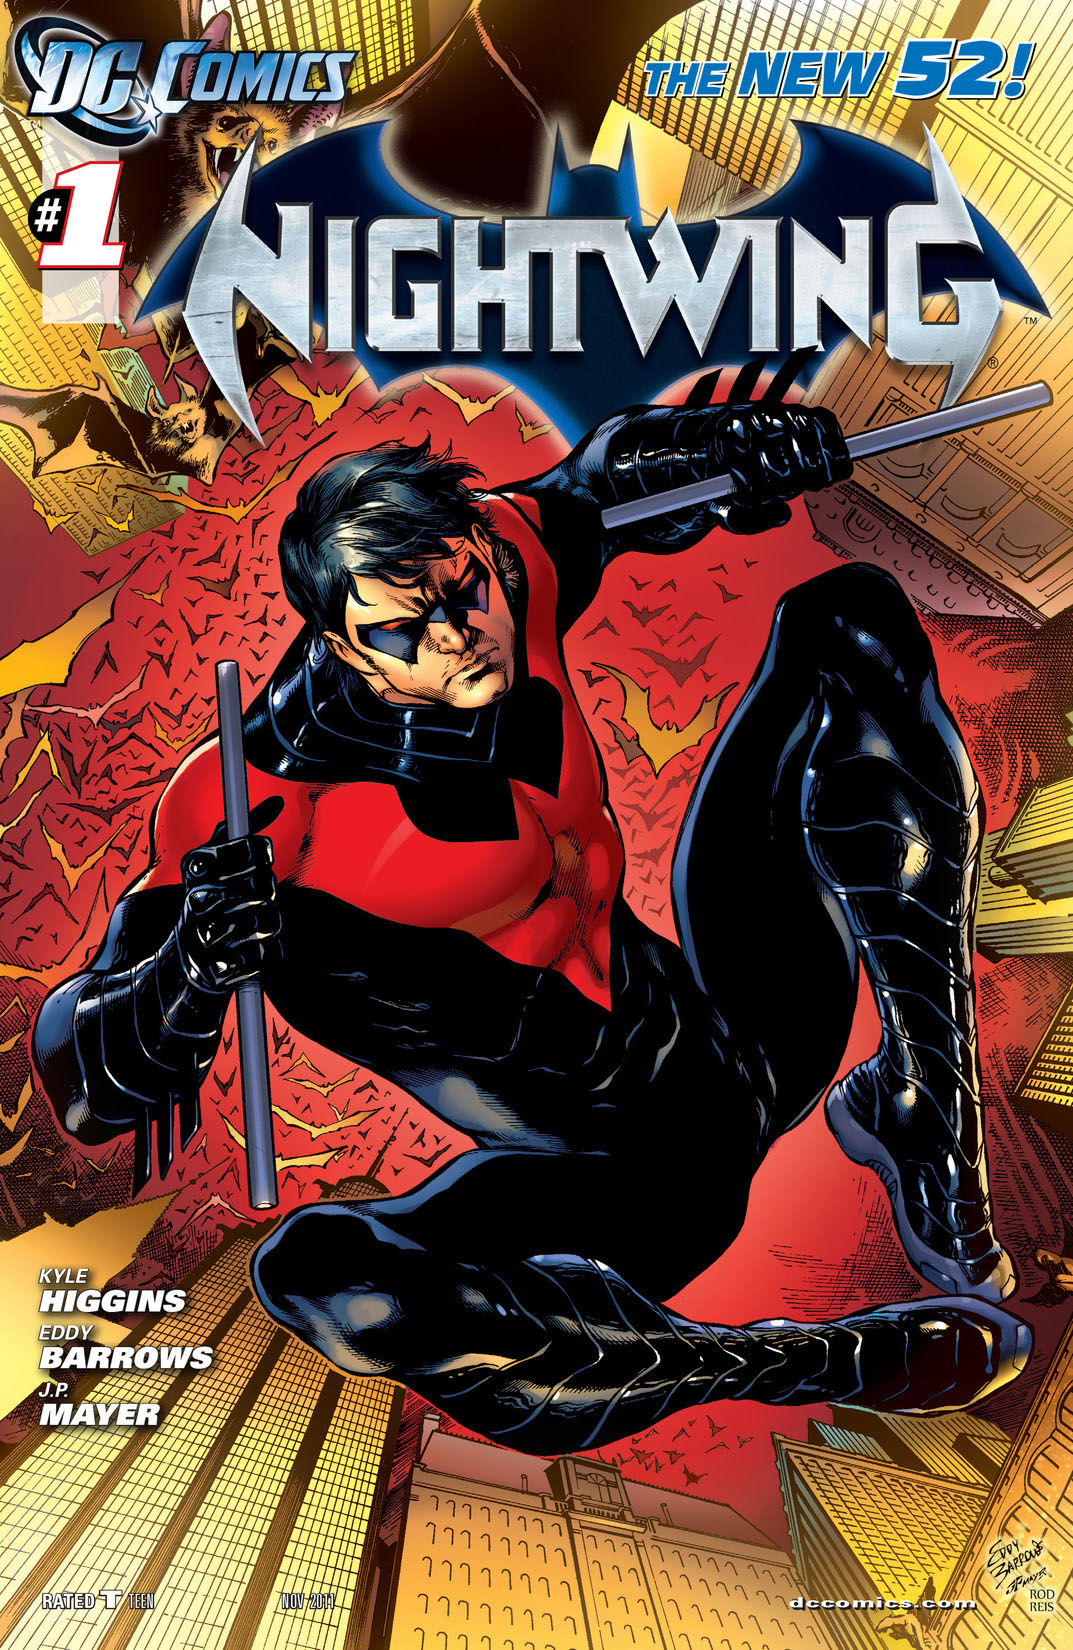 Nightwing (2011-) #1 preview images